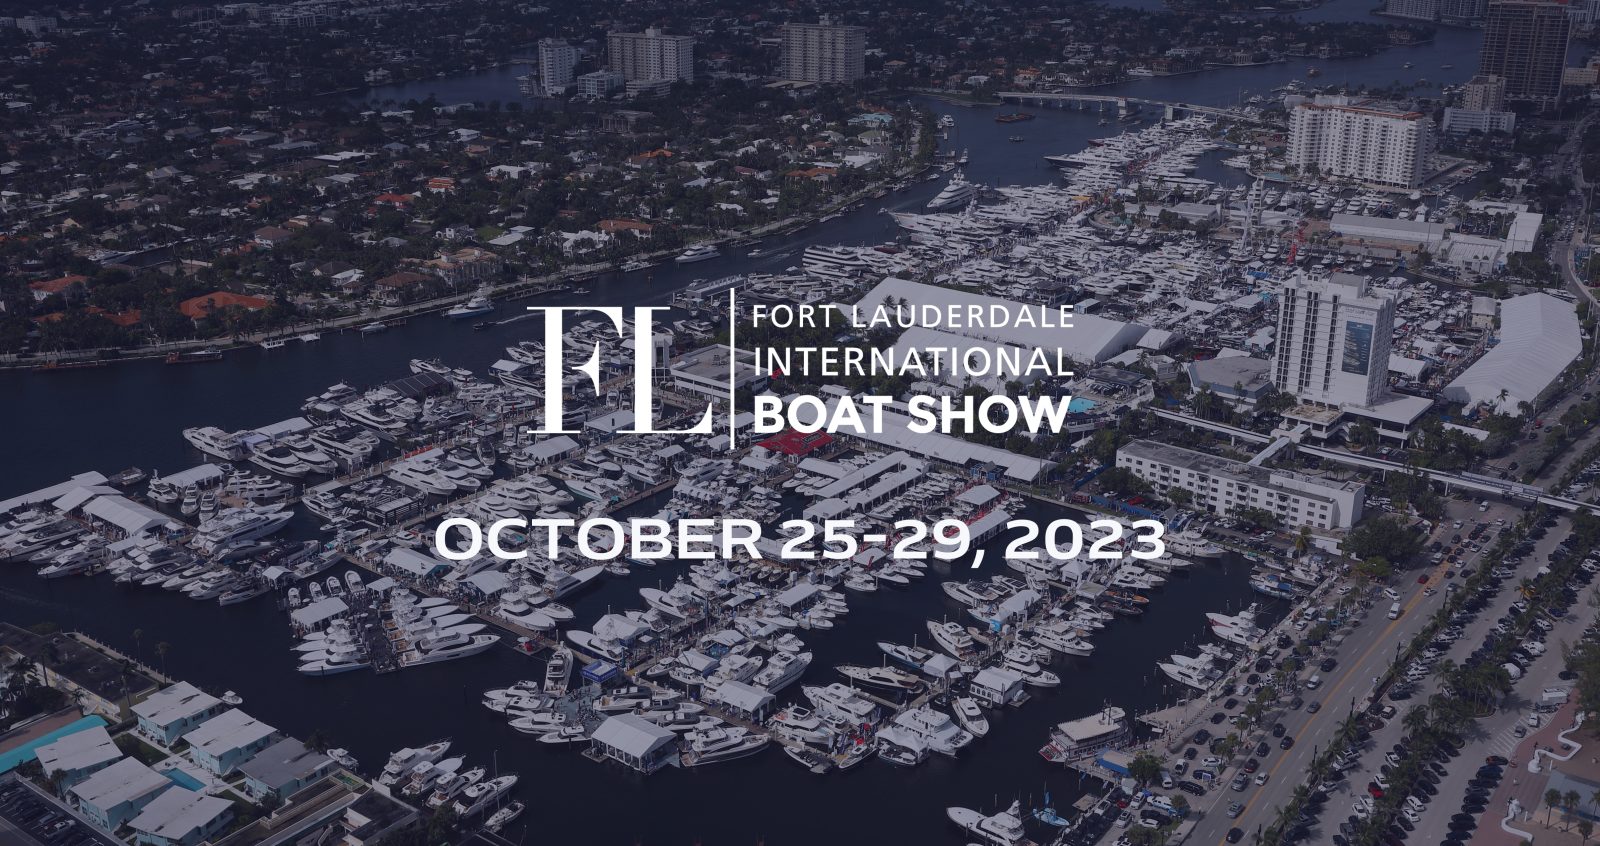 Fort lauderdale boat show